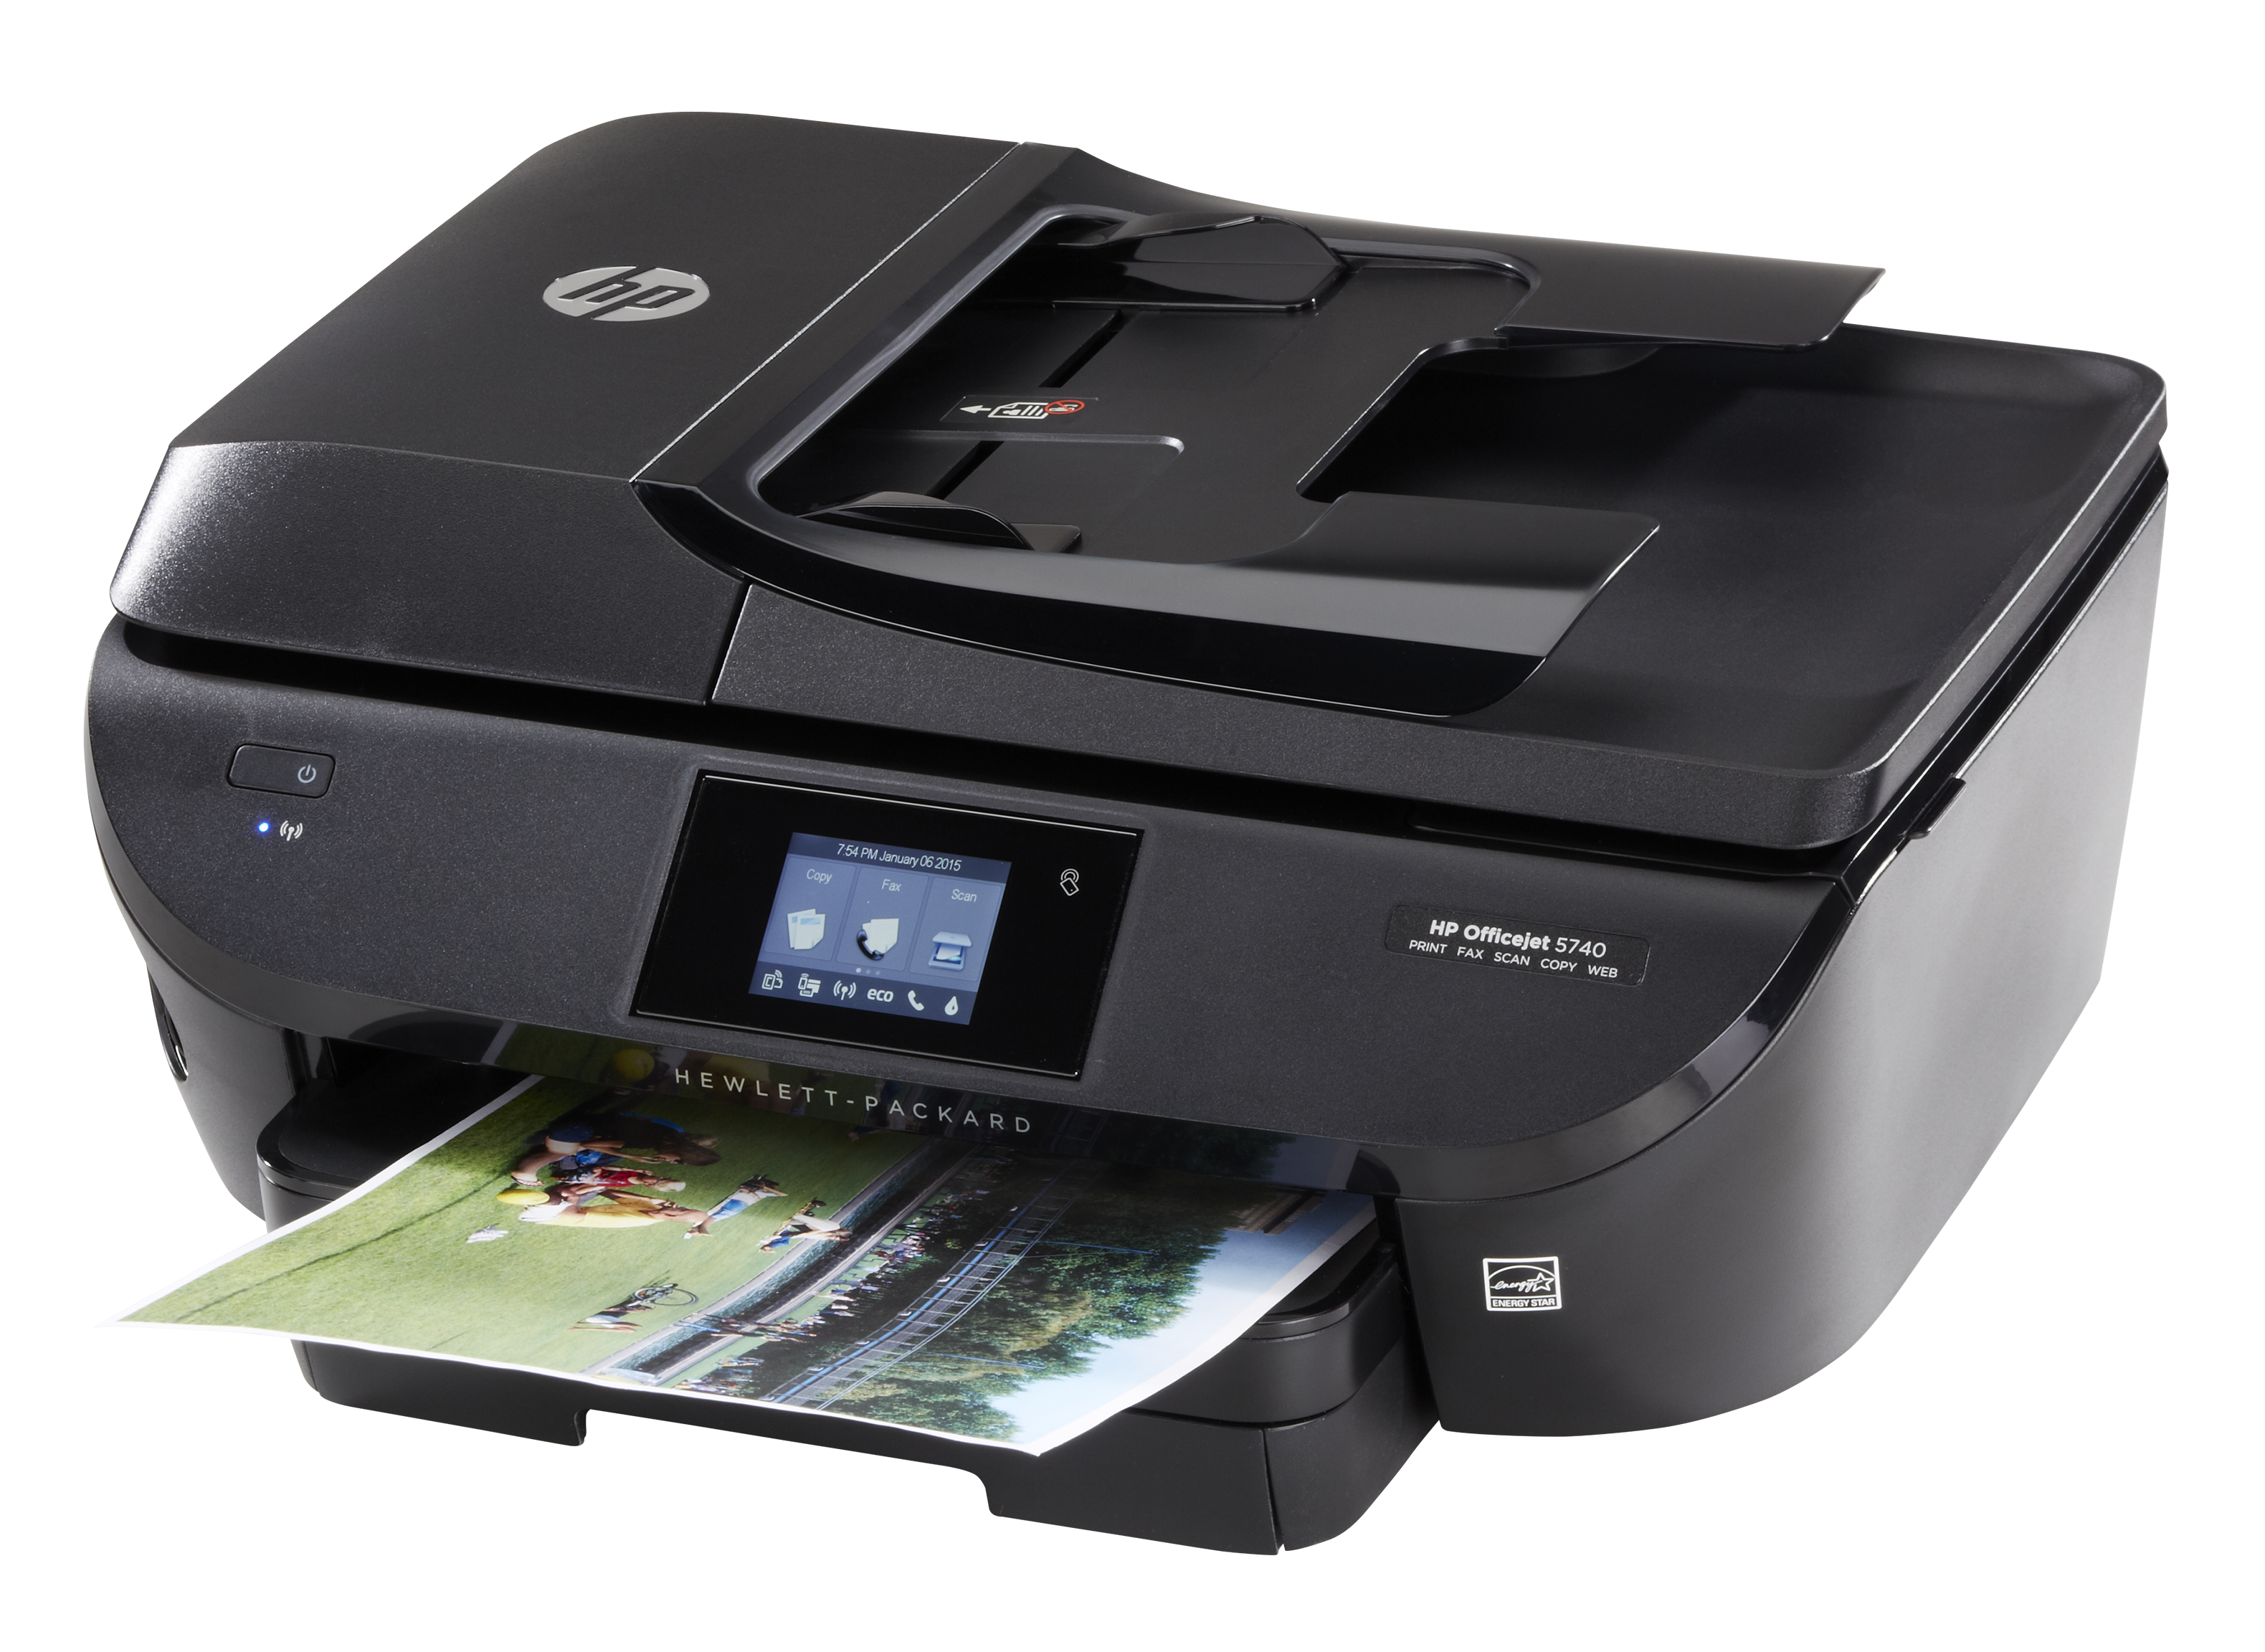 Afdeling Moderat støbt HP Officejet 5740 Printer Review - Consumer Reports